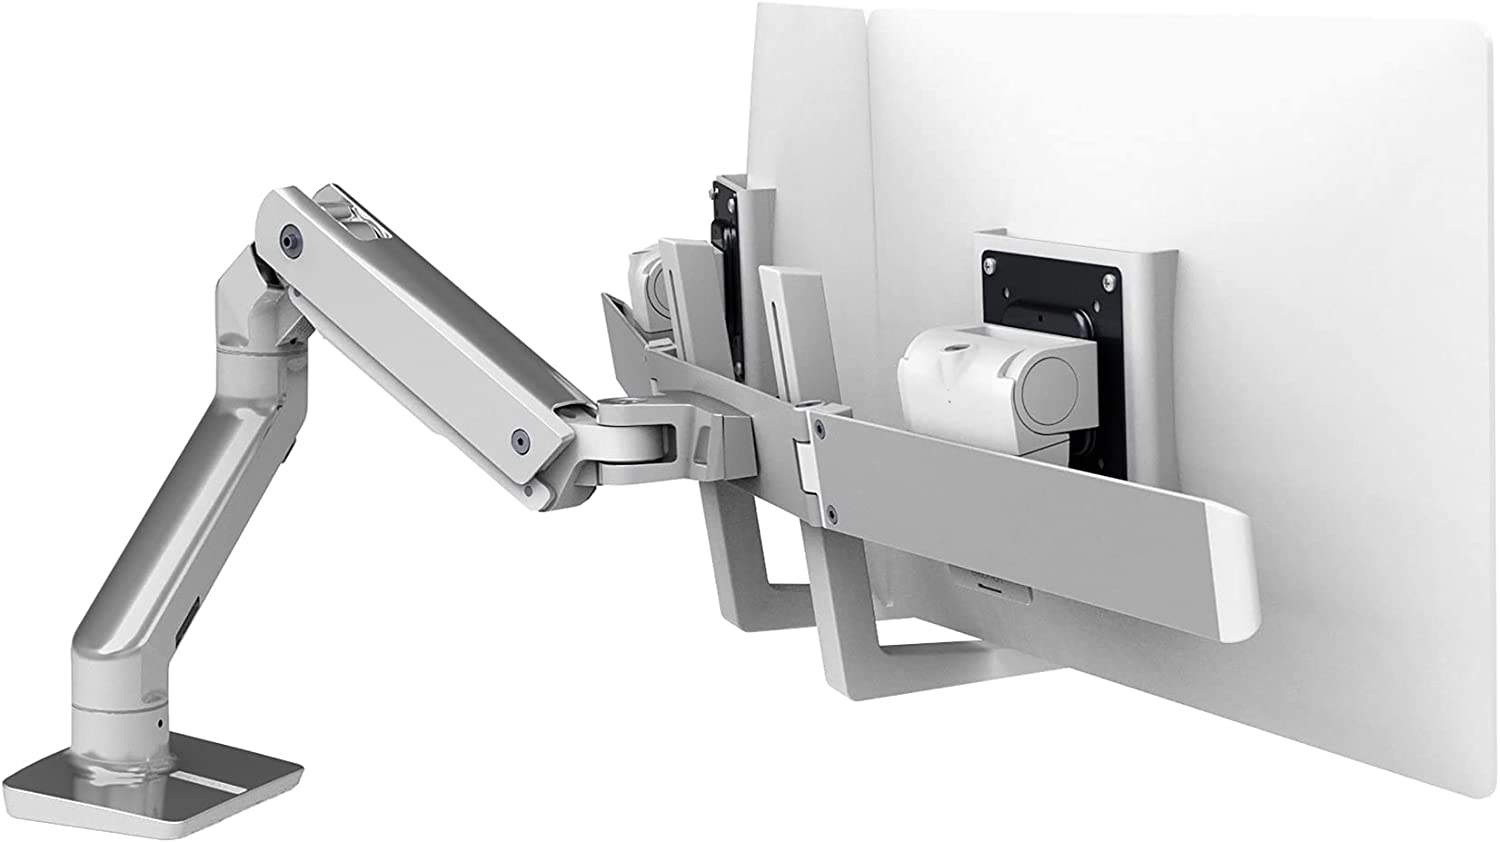 Ergotron – HX Dual Monitor Arm, VESA Desk Mount – for 2 Monitors Up to 32 Inches, 5 to 17.5 lbs Each – Polished Aluminum